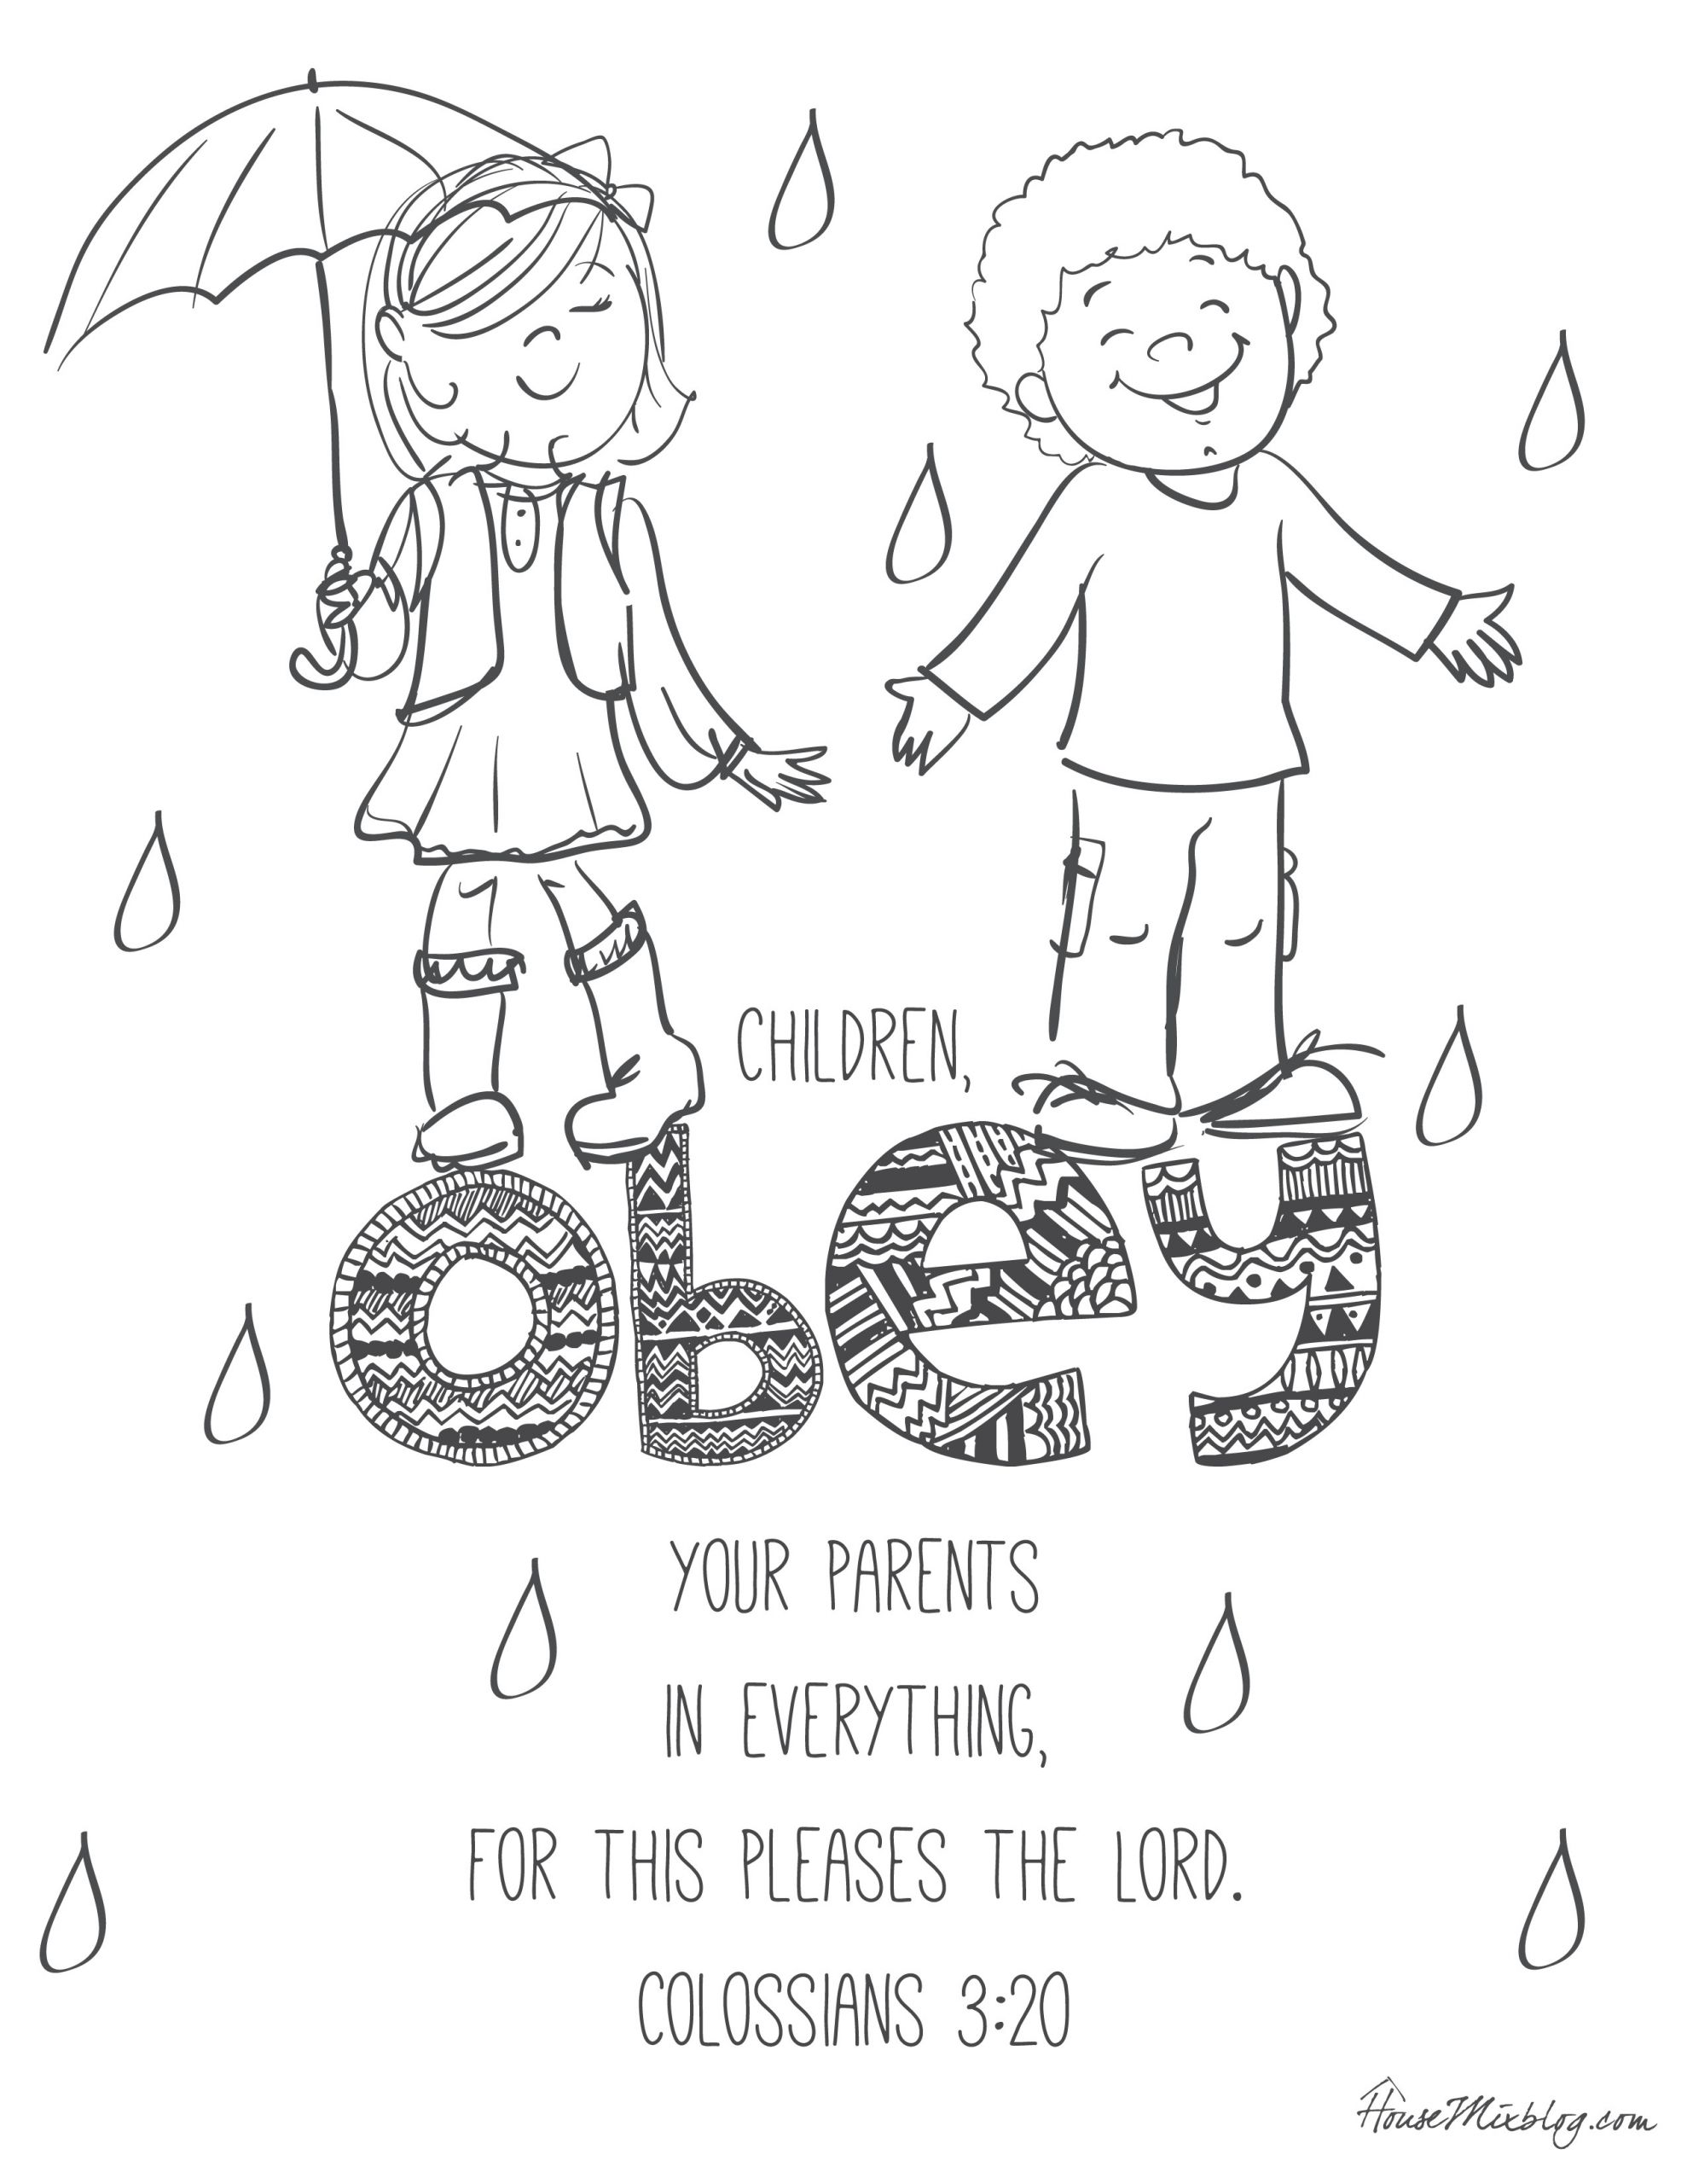 Kids Bible Coloring Pages
 11 Bible verses to teach kids with printables to color